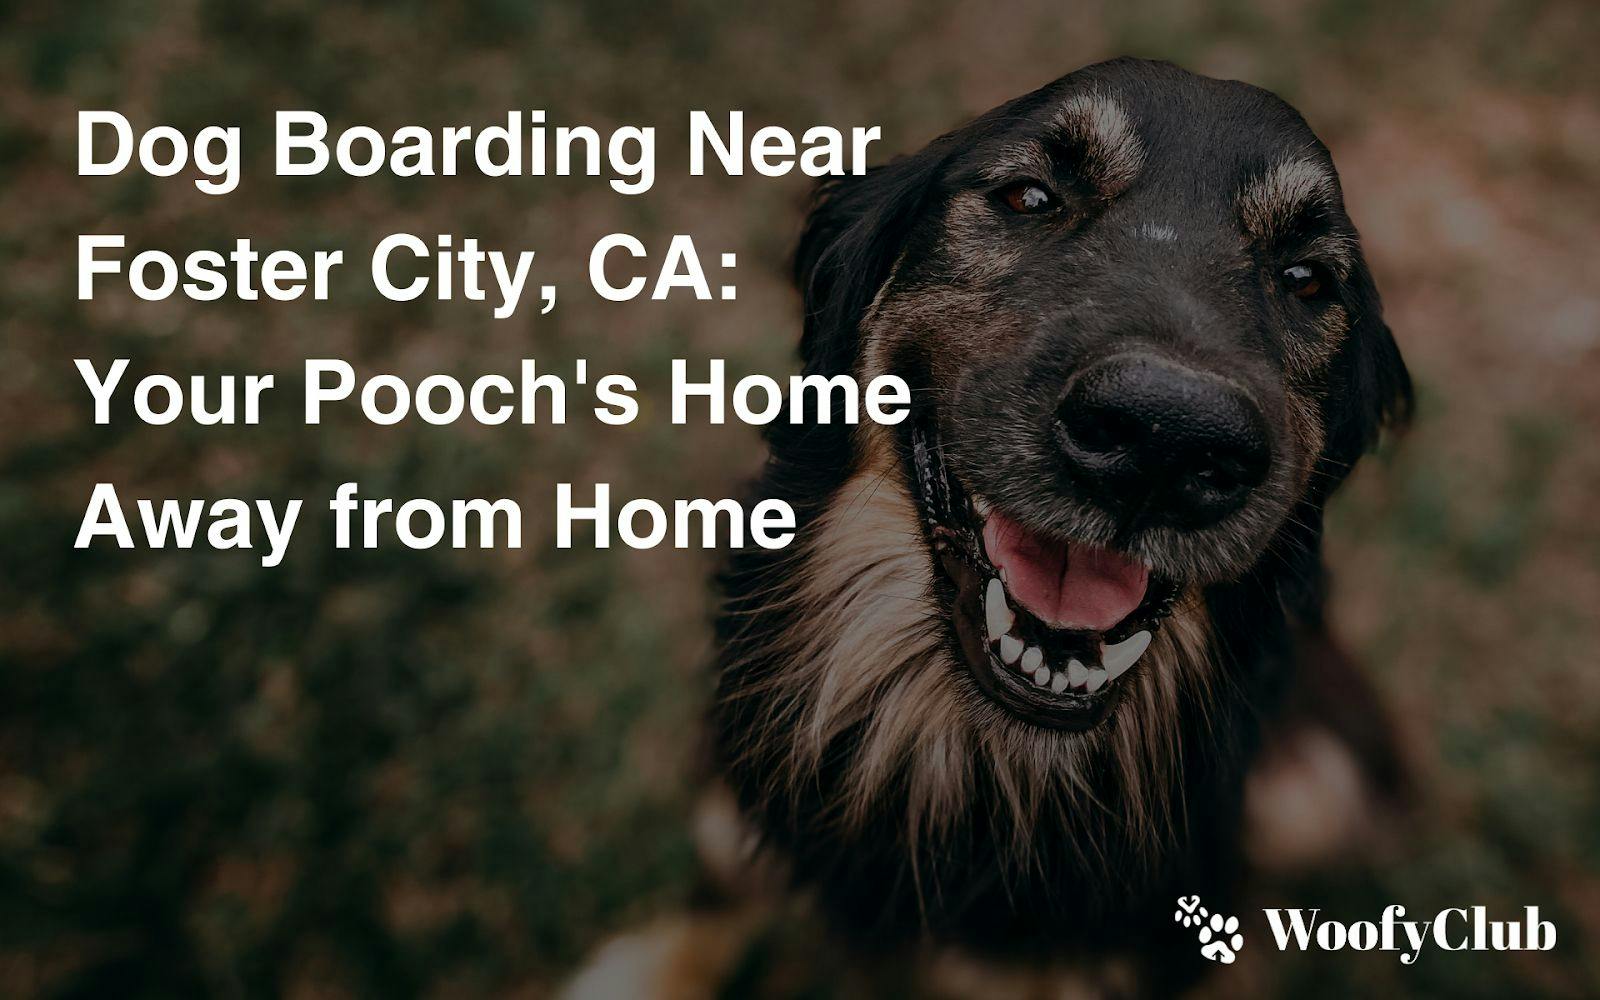 Dog Boarding Near Foster City, CA: Your Pooch's Home Away From Home